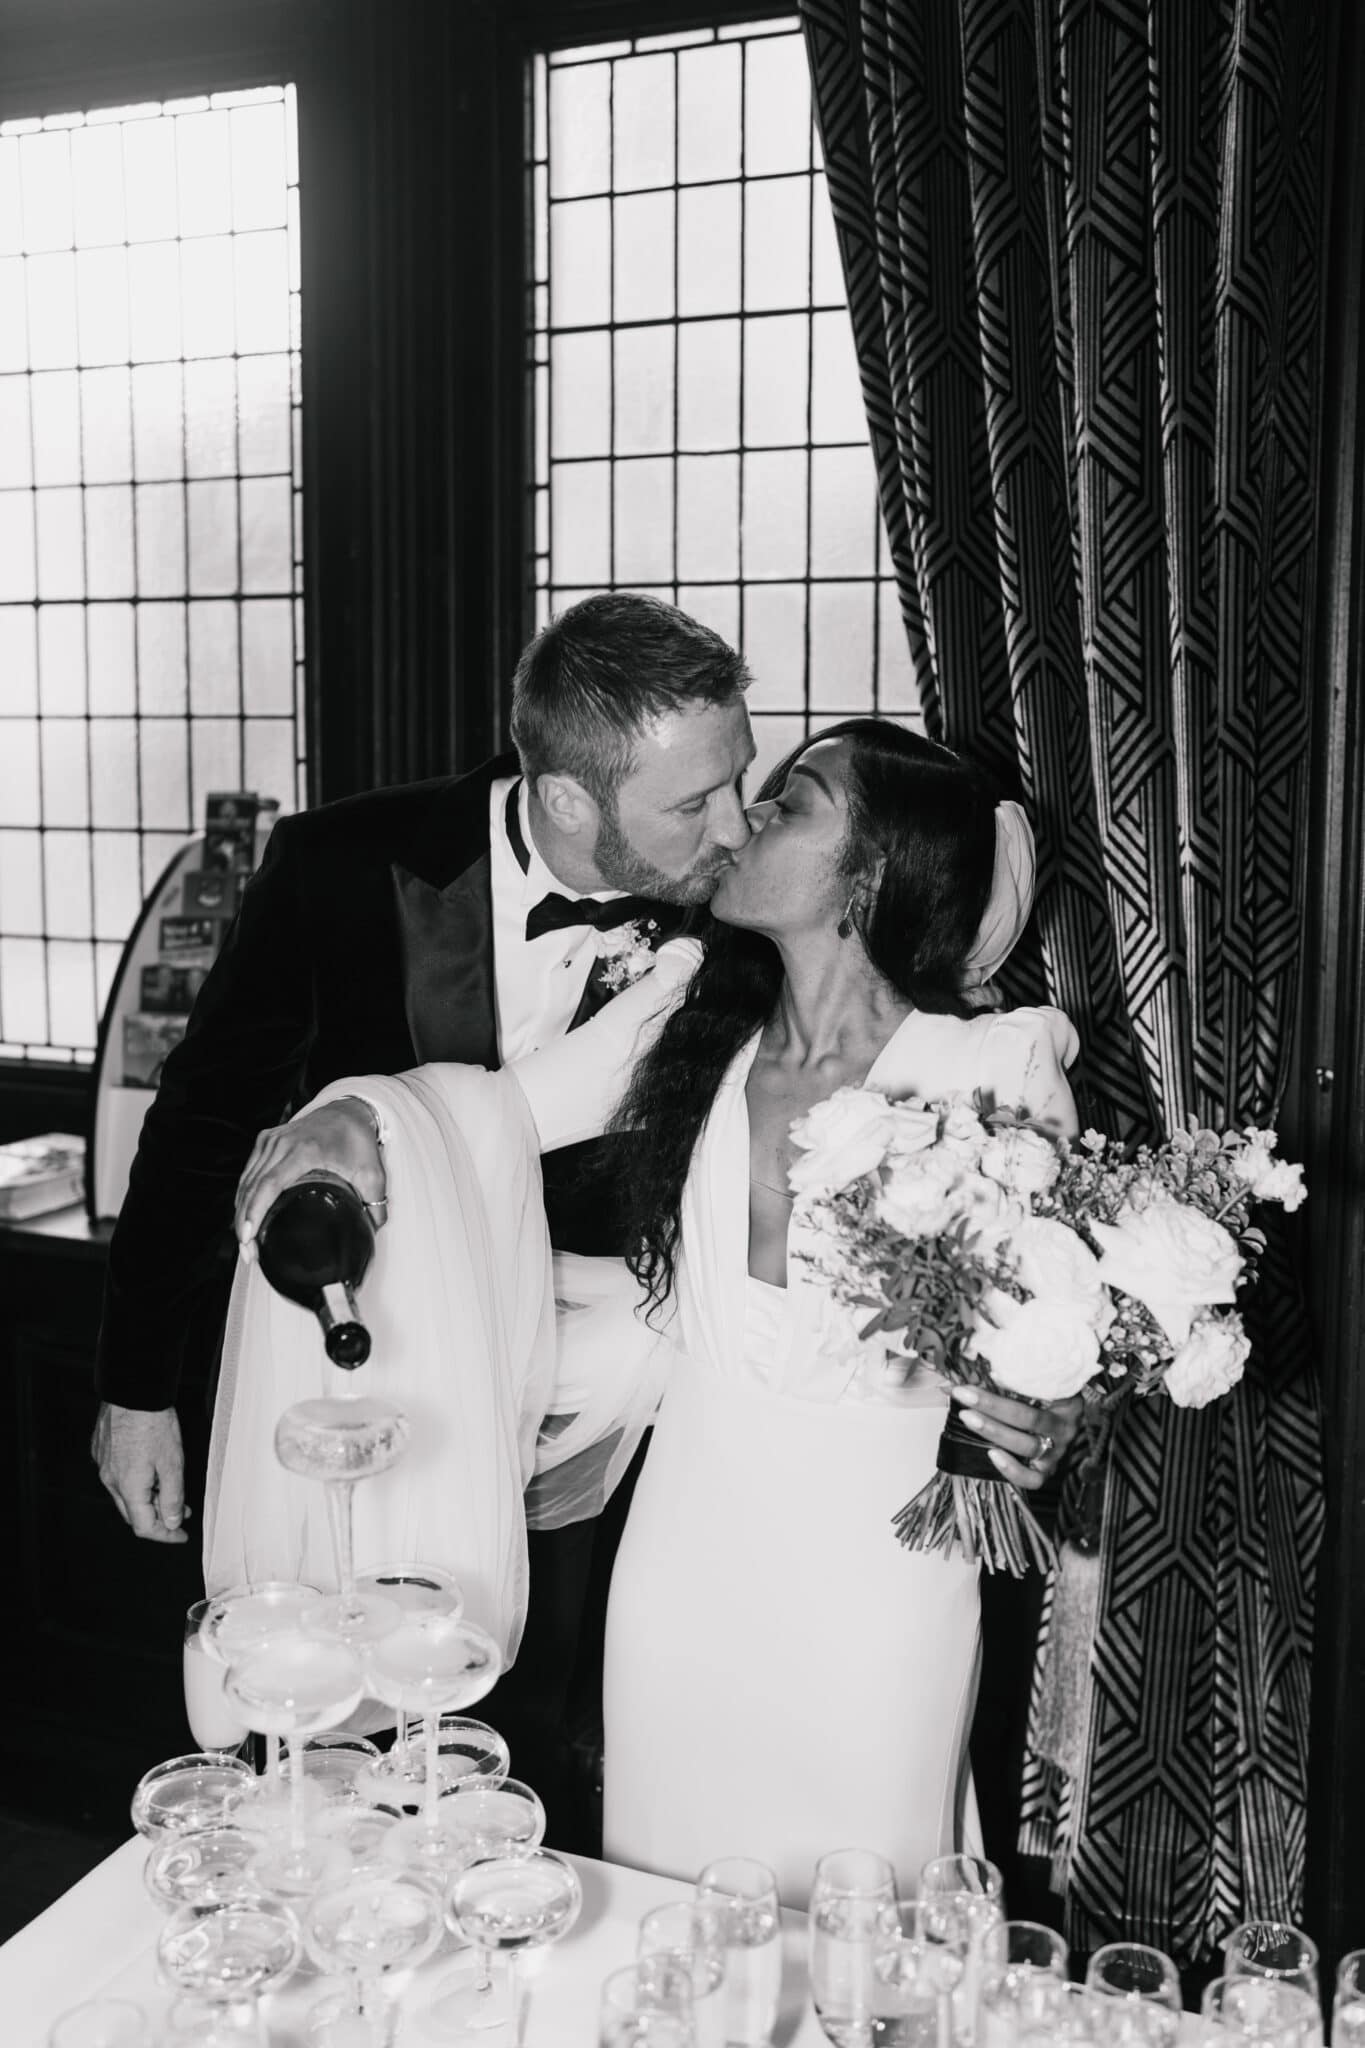 A bride and groom kissing passionately while holding a bridal bouquet, with a background of large windows and patterned curtains in a dimly lit room.